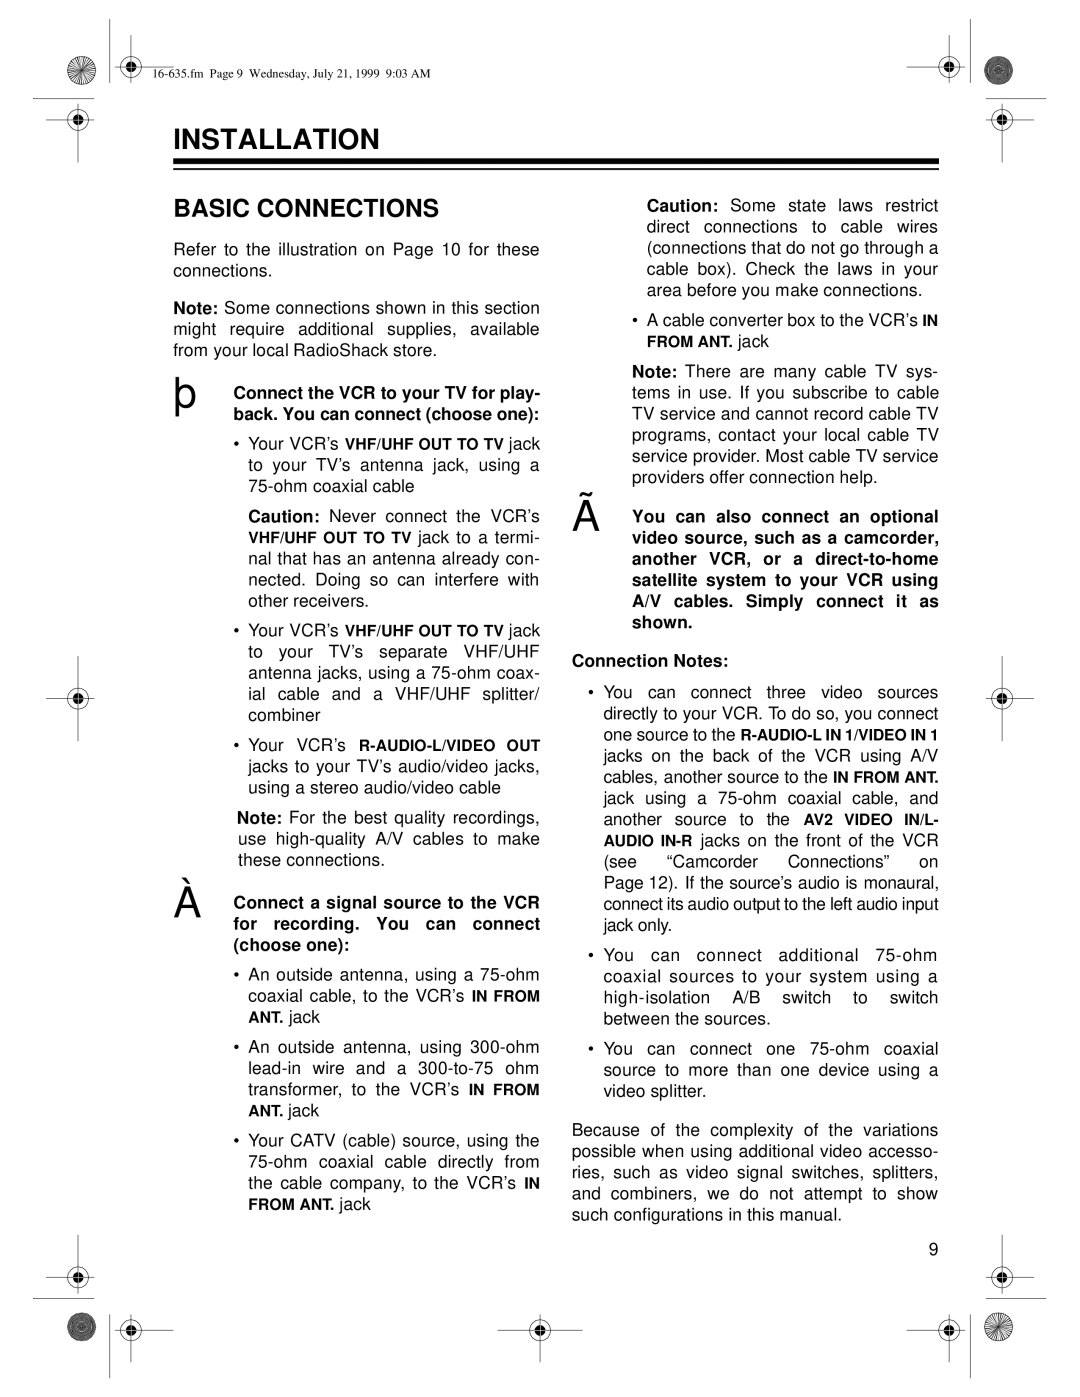 Radio Shack 66 owner manual Installation, Basic Connections 